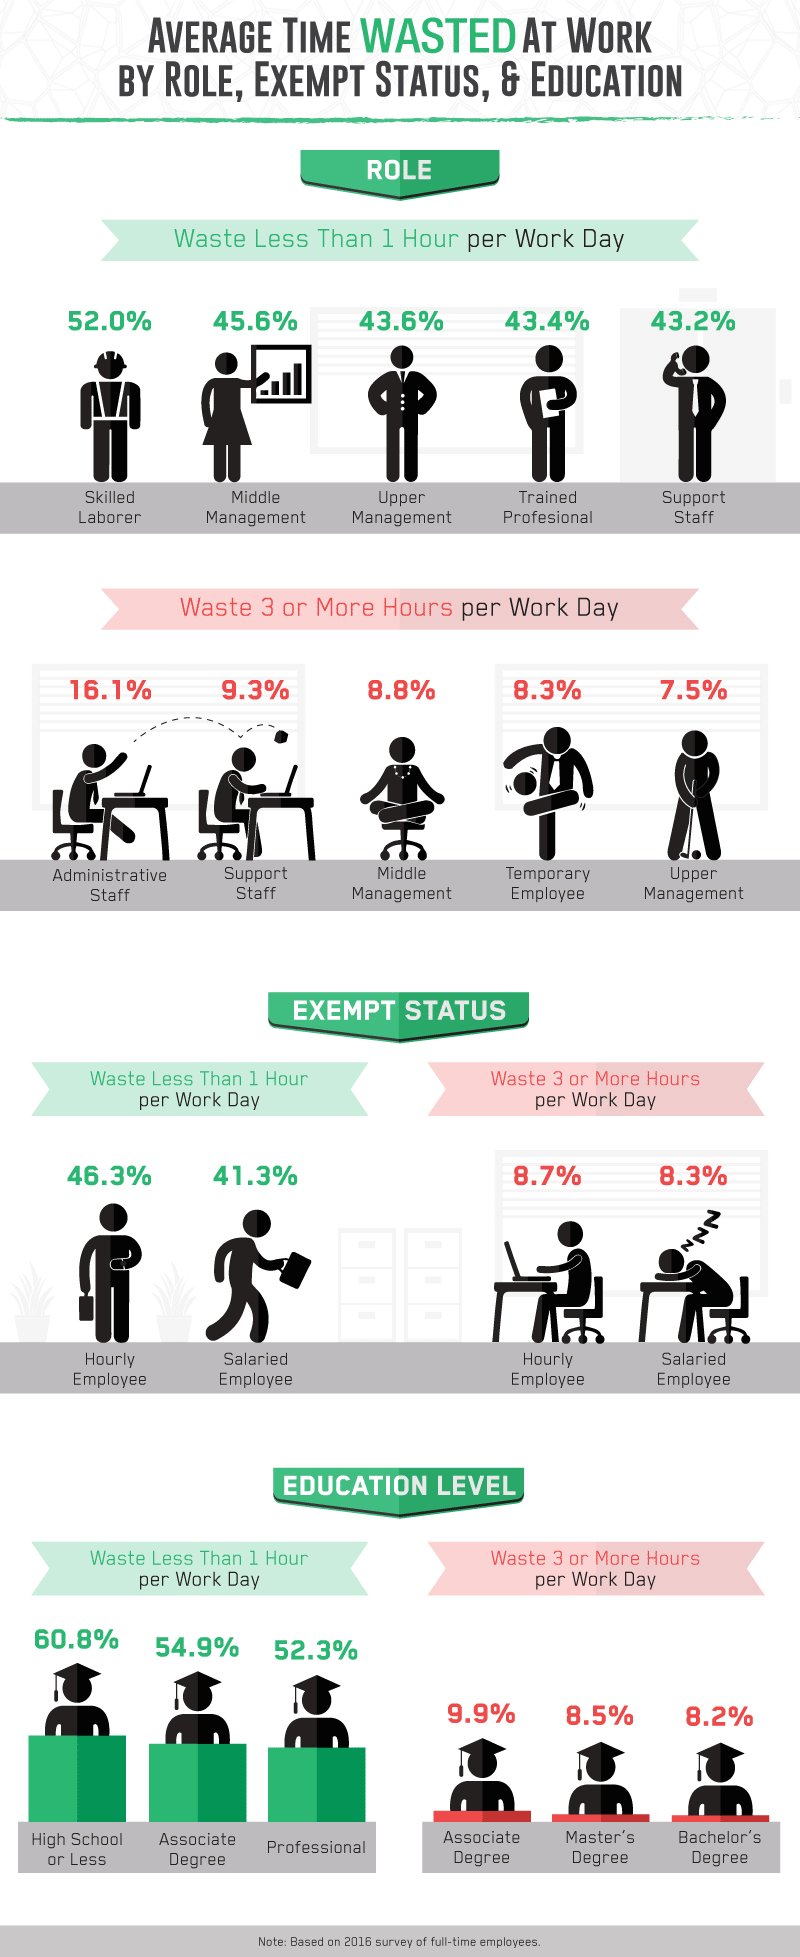 Average time wasted at work by role, exempt status, and education.